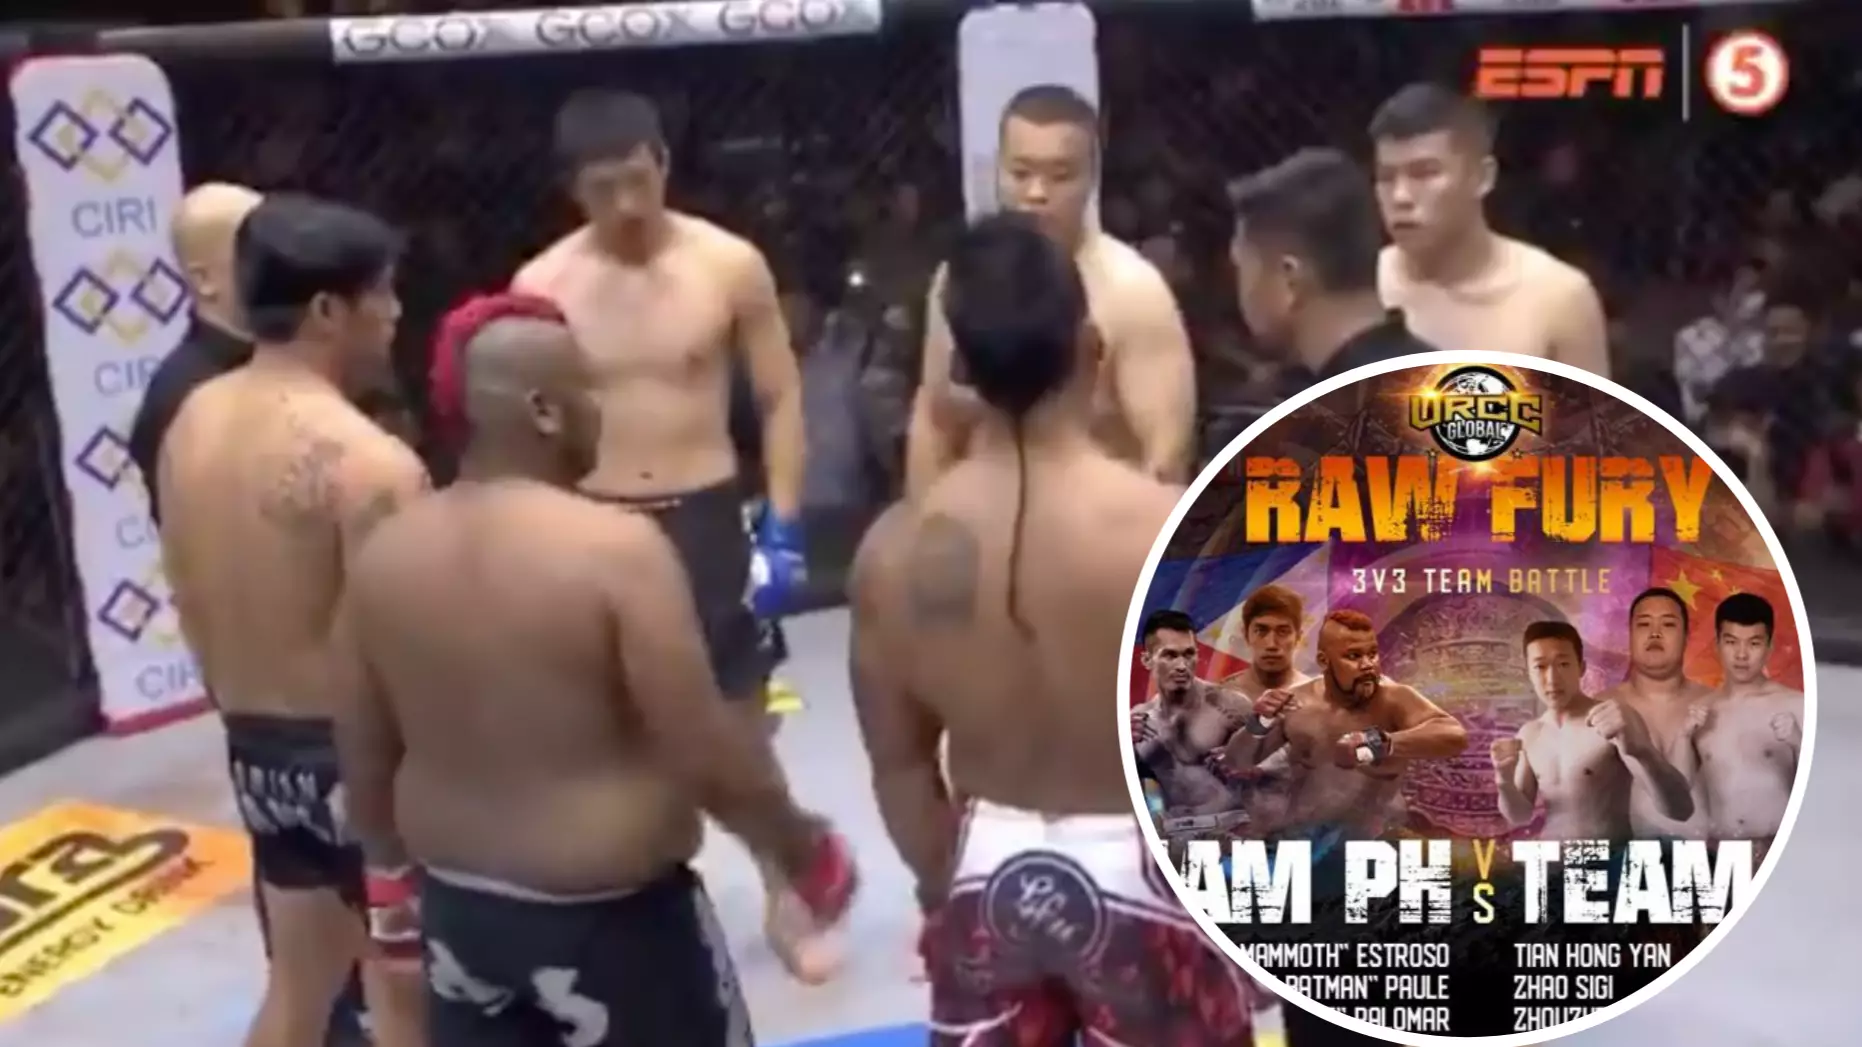 Team Philippines Vs Team China In A 3-Vs-3 MMA Fight Is Complete Chaos